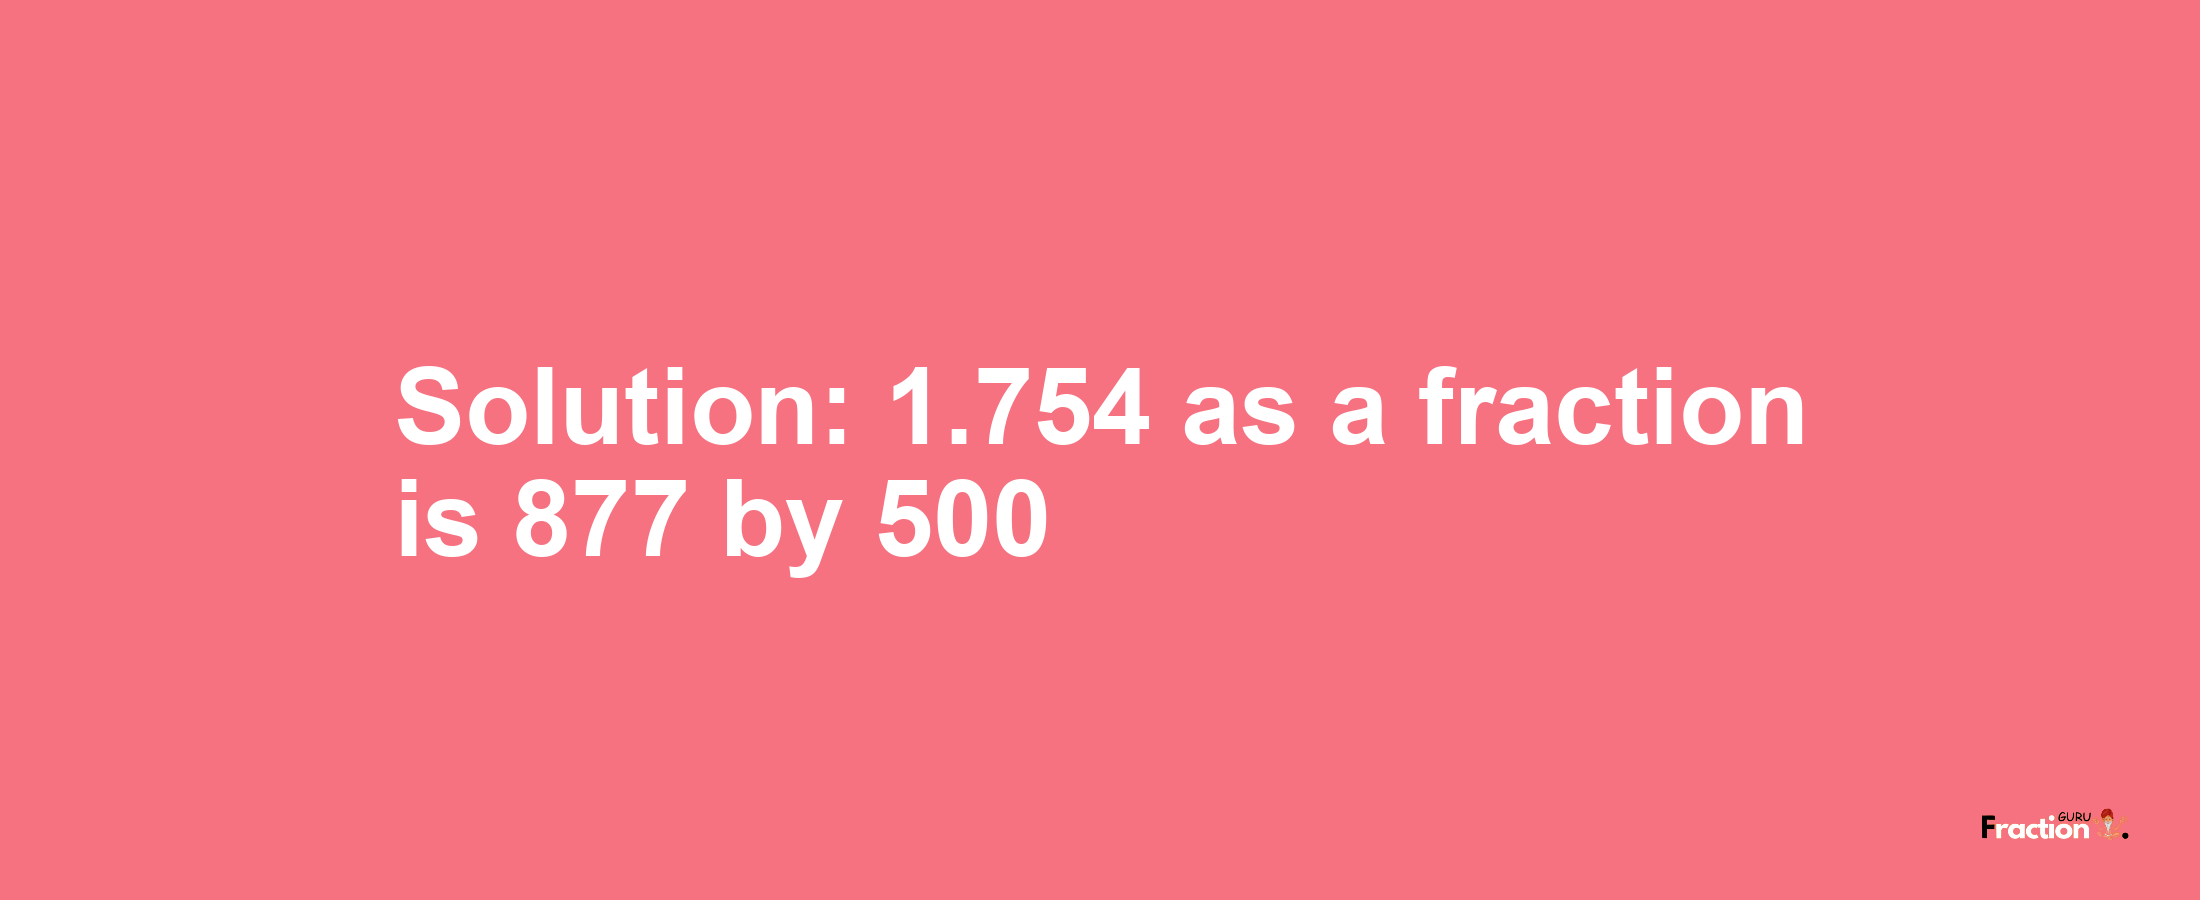 Solution:1.754 as a fraction is 877/500